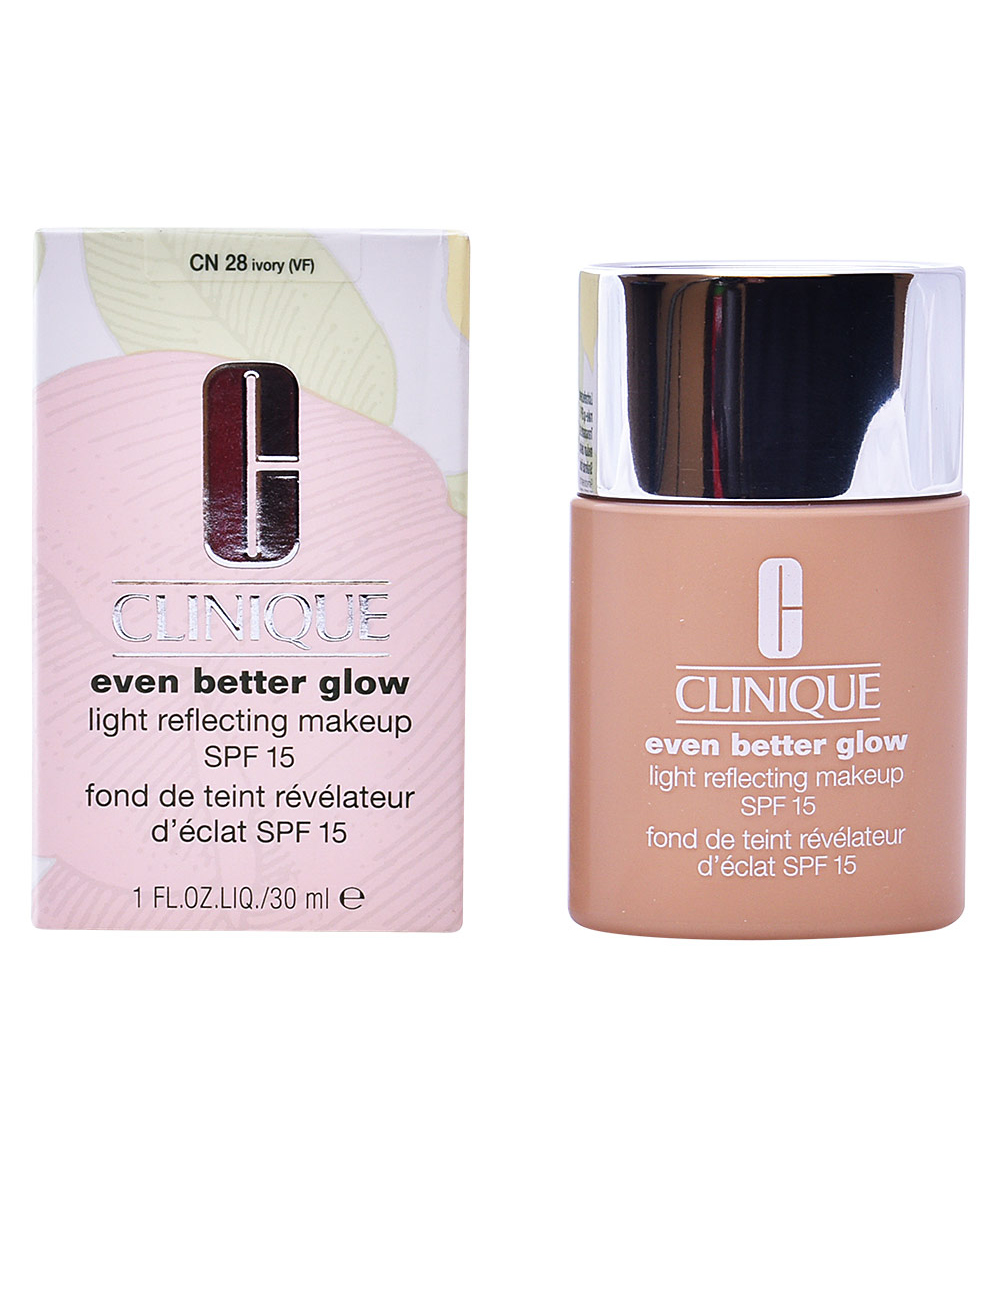 Clinique even better glow light reflecting makeup SPF 15 #ivory